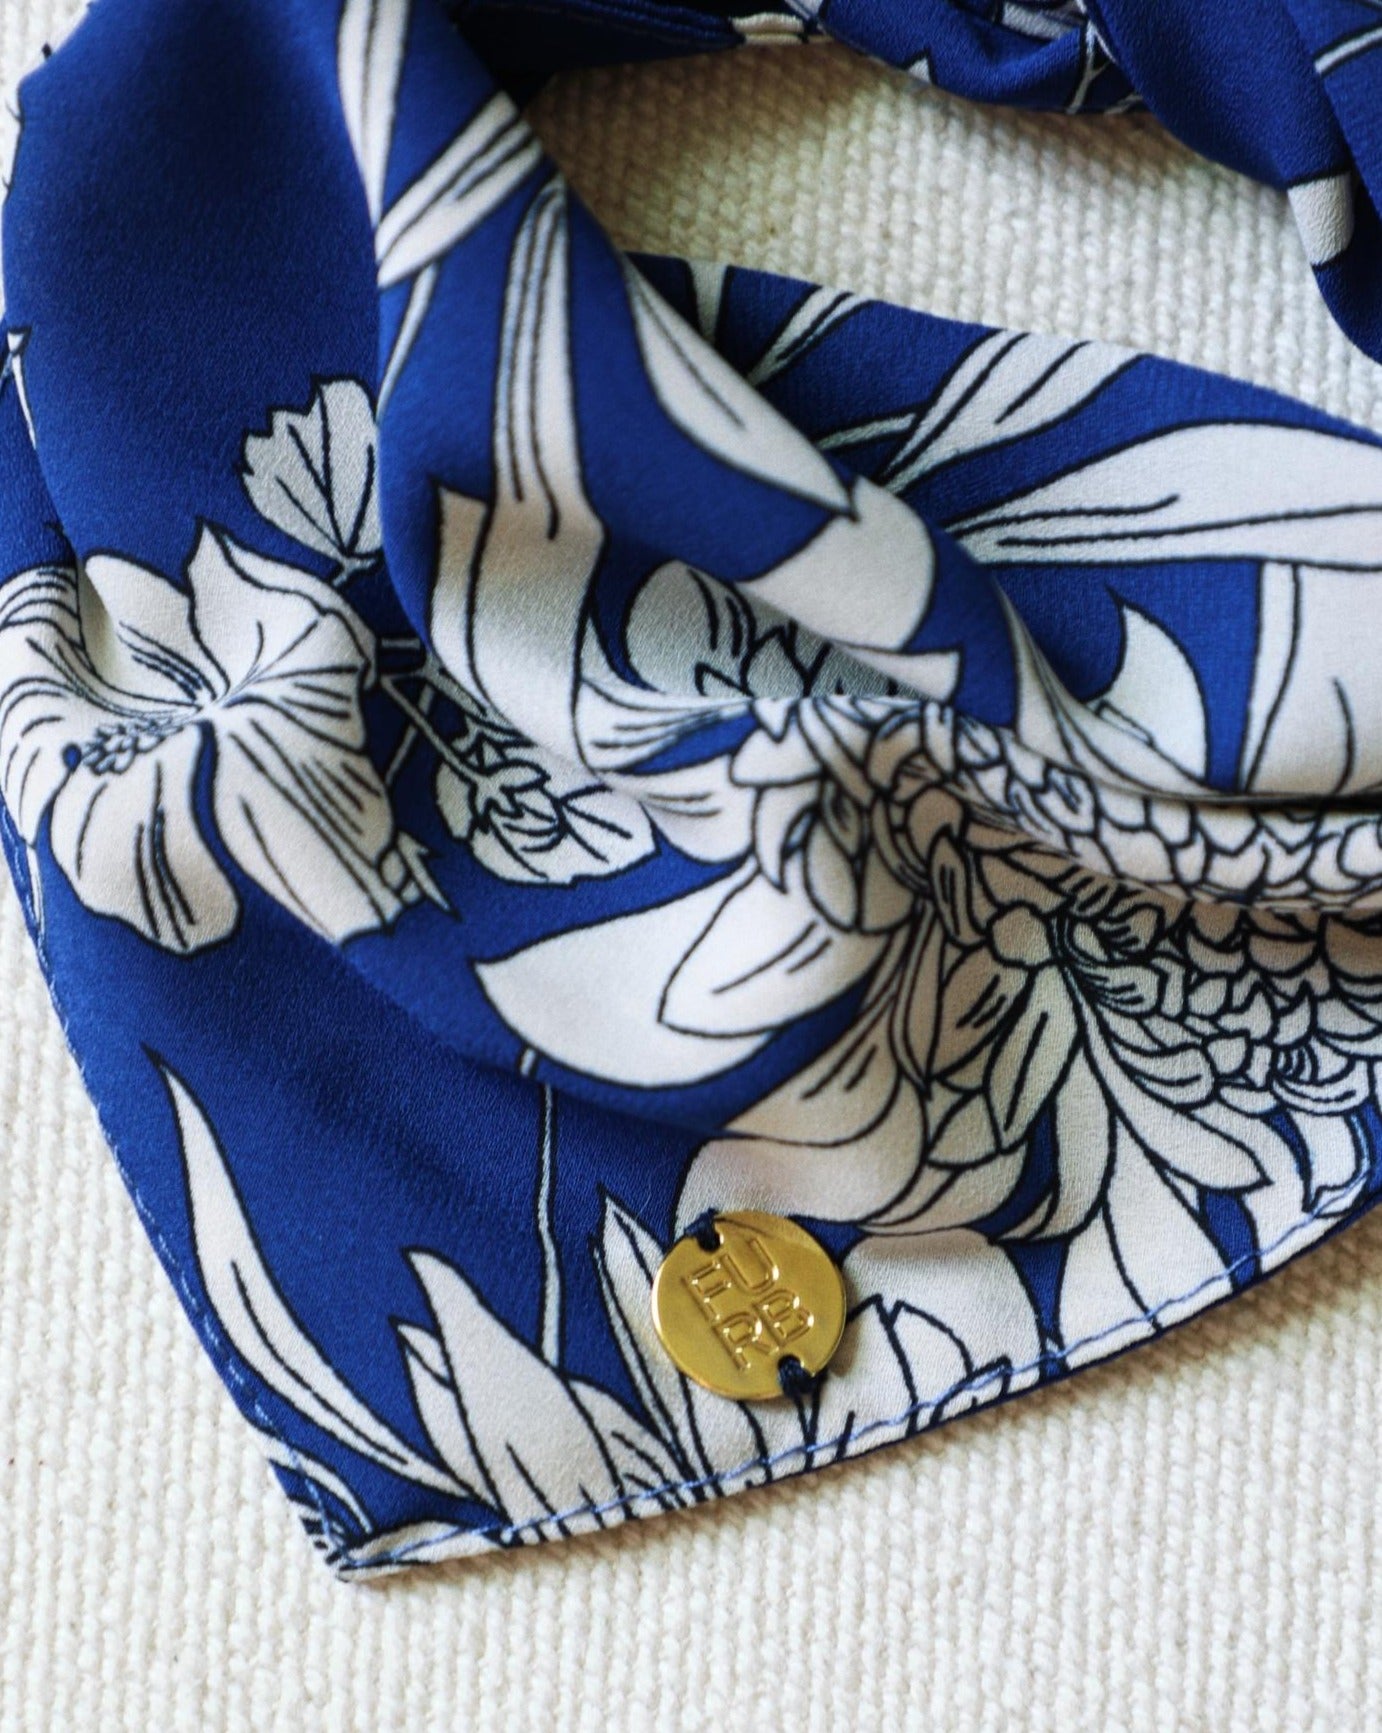 Only the Best Bandana in Blue + White Floral